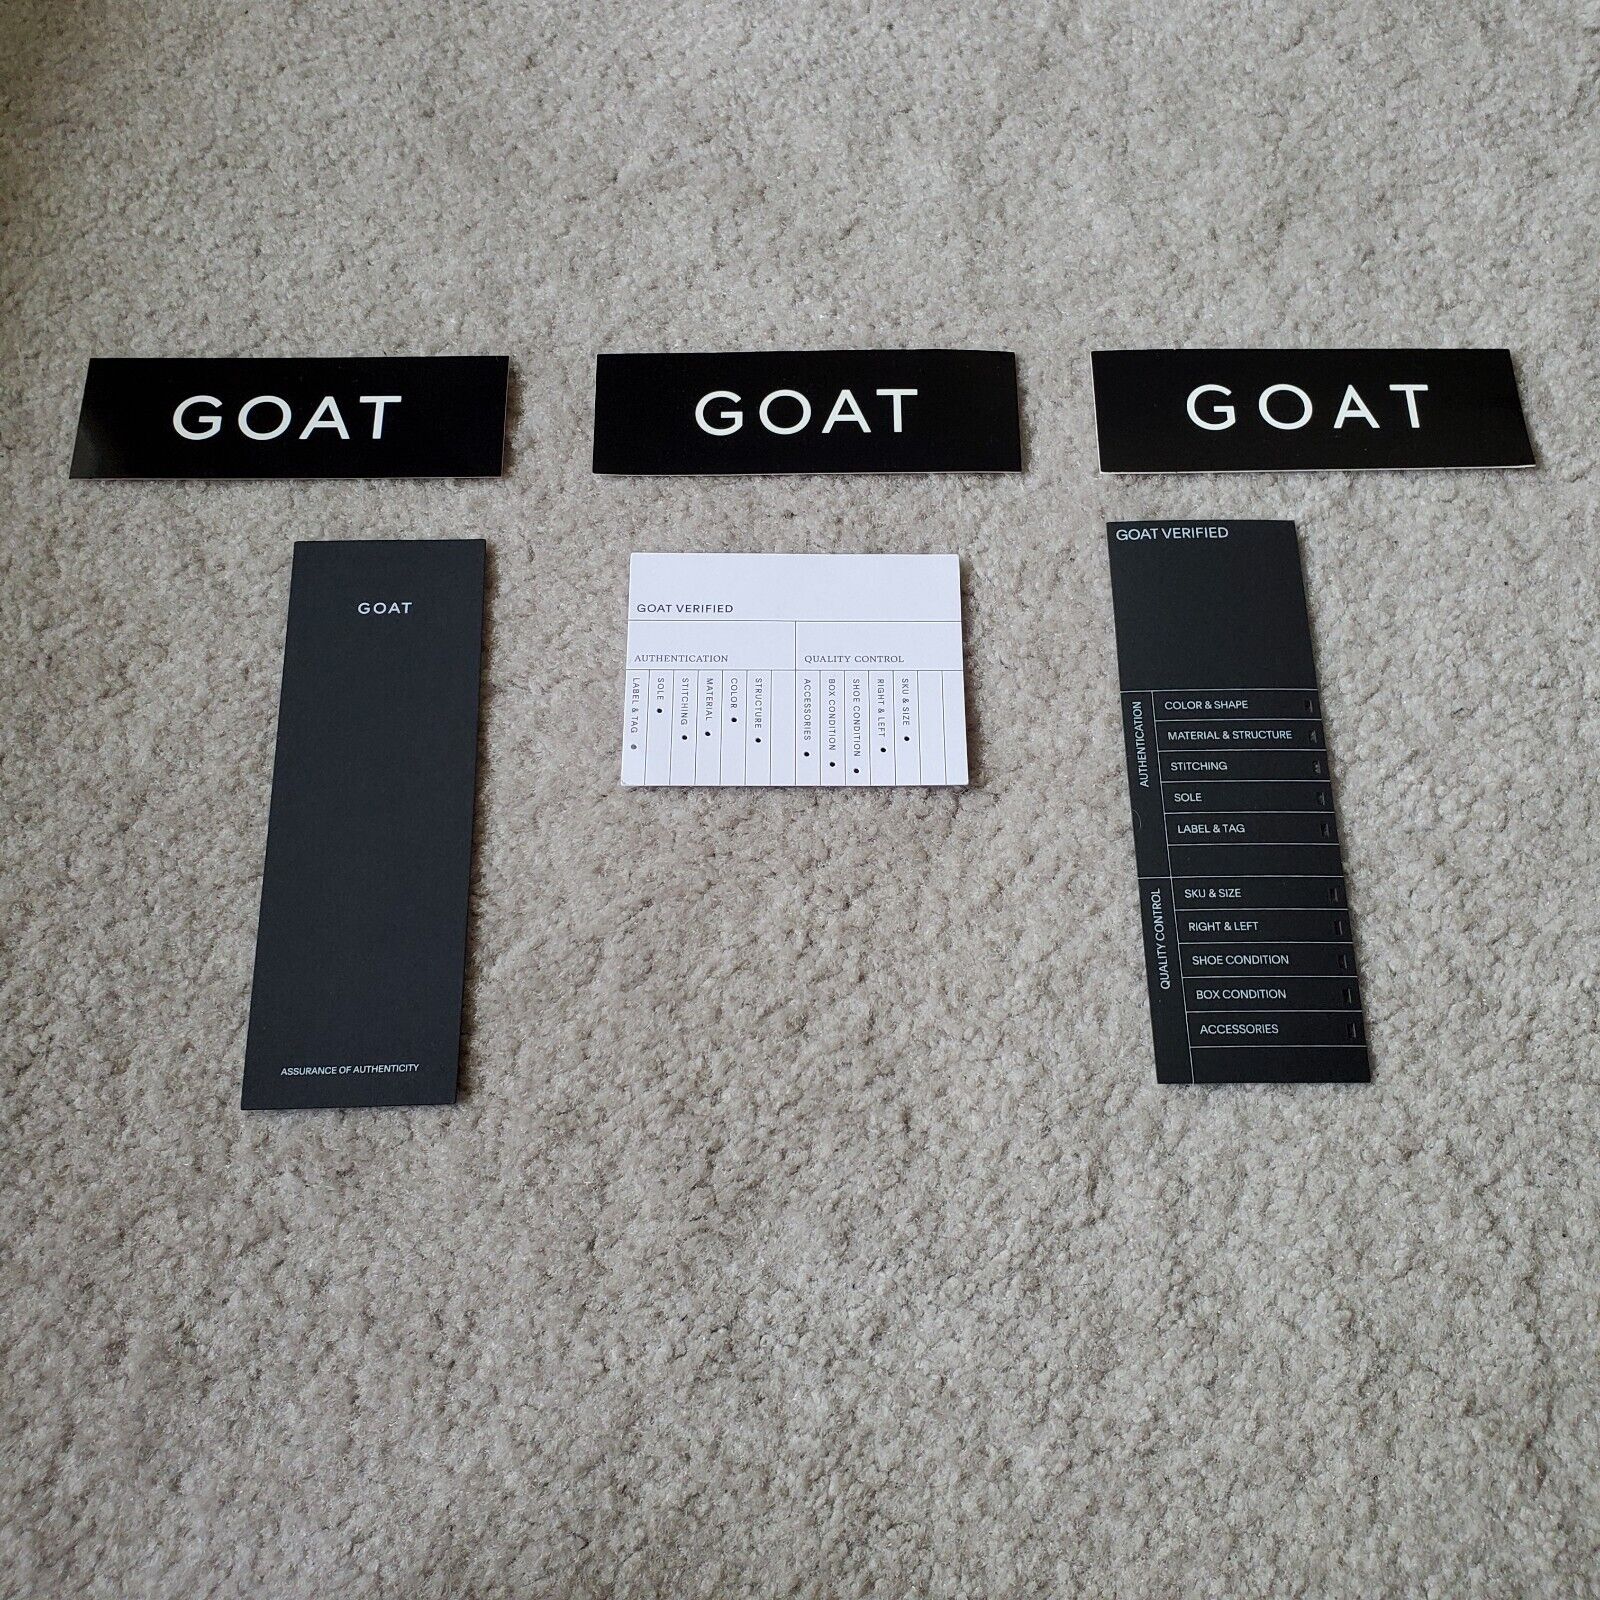 Lot 3 - GOAT Verified Authentication Card And Sticker For Sneakers